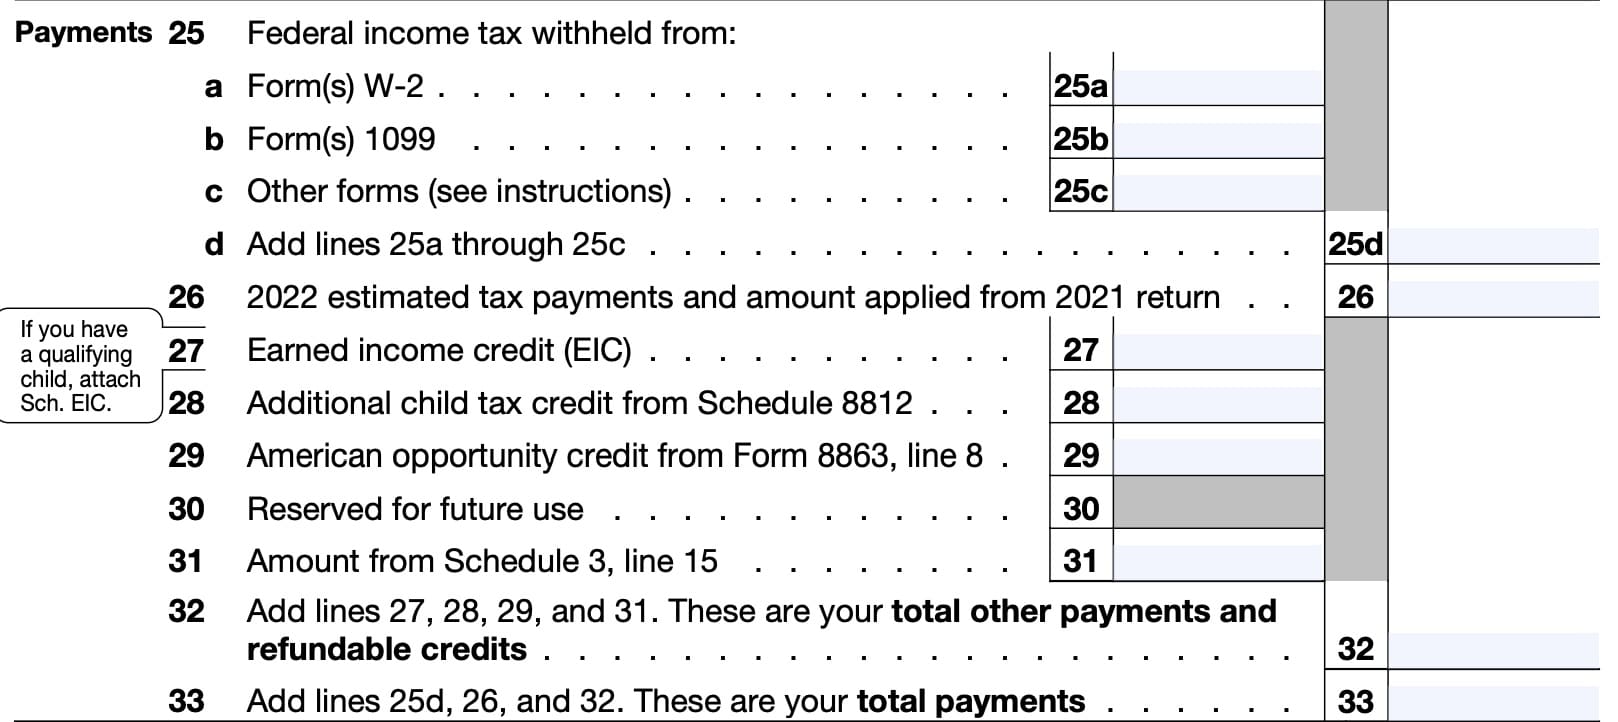 irs form 1040-sr, payments, lines 25 through 33